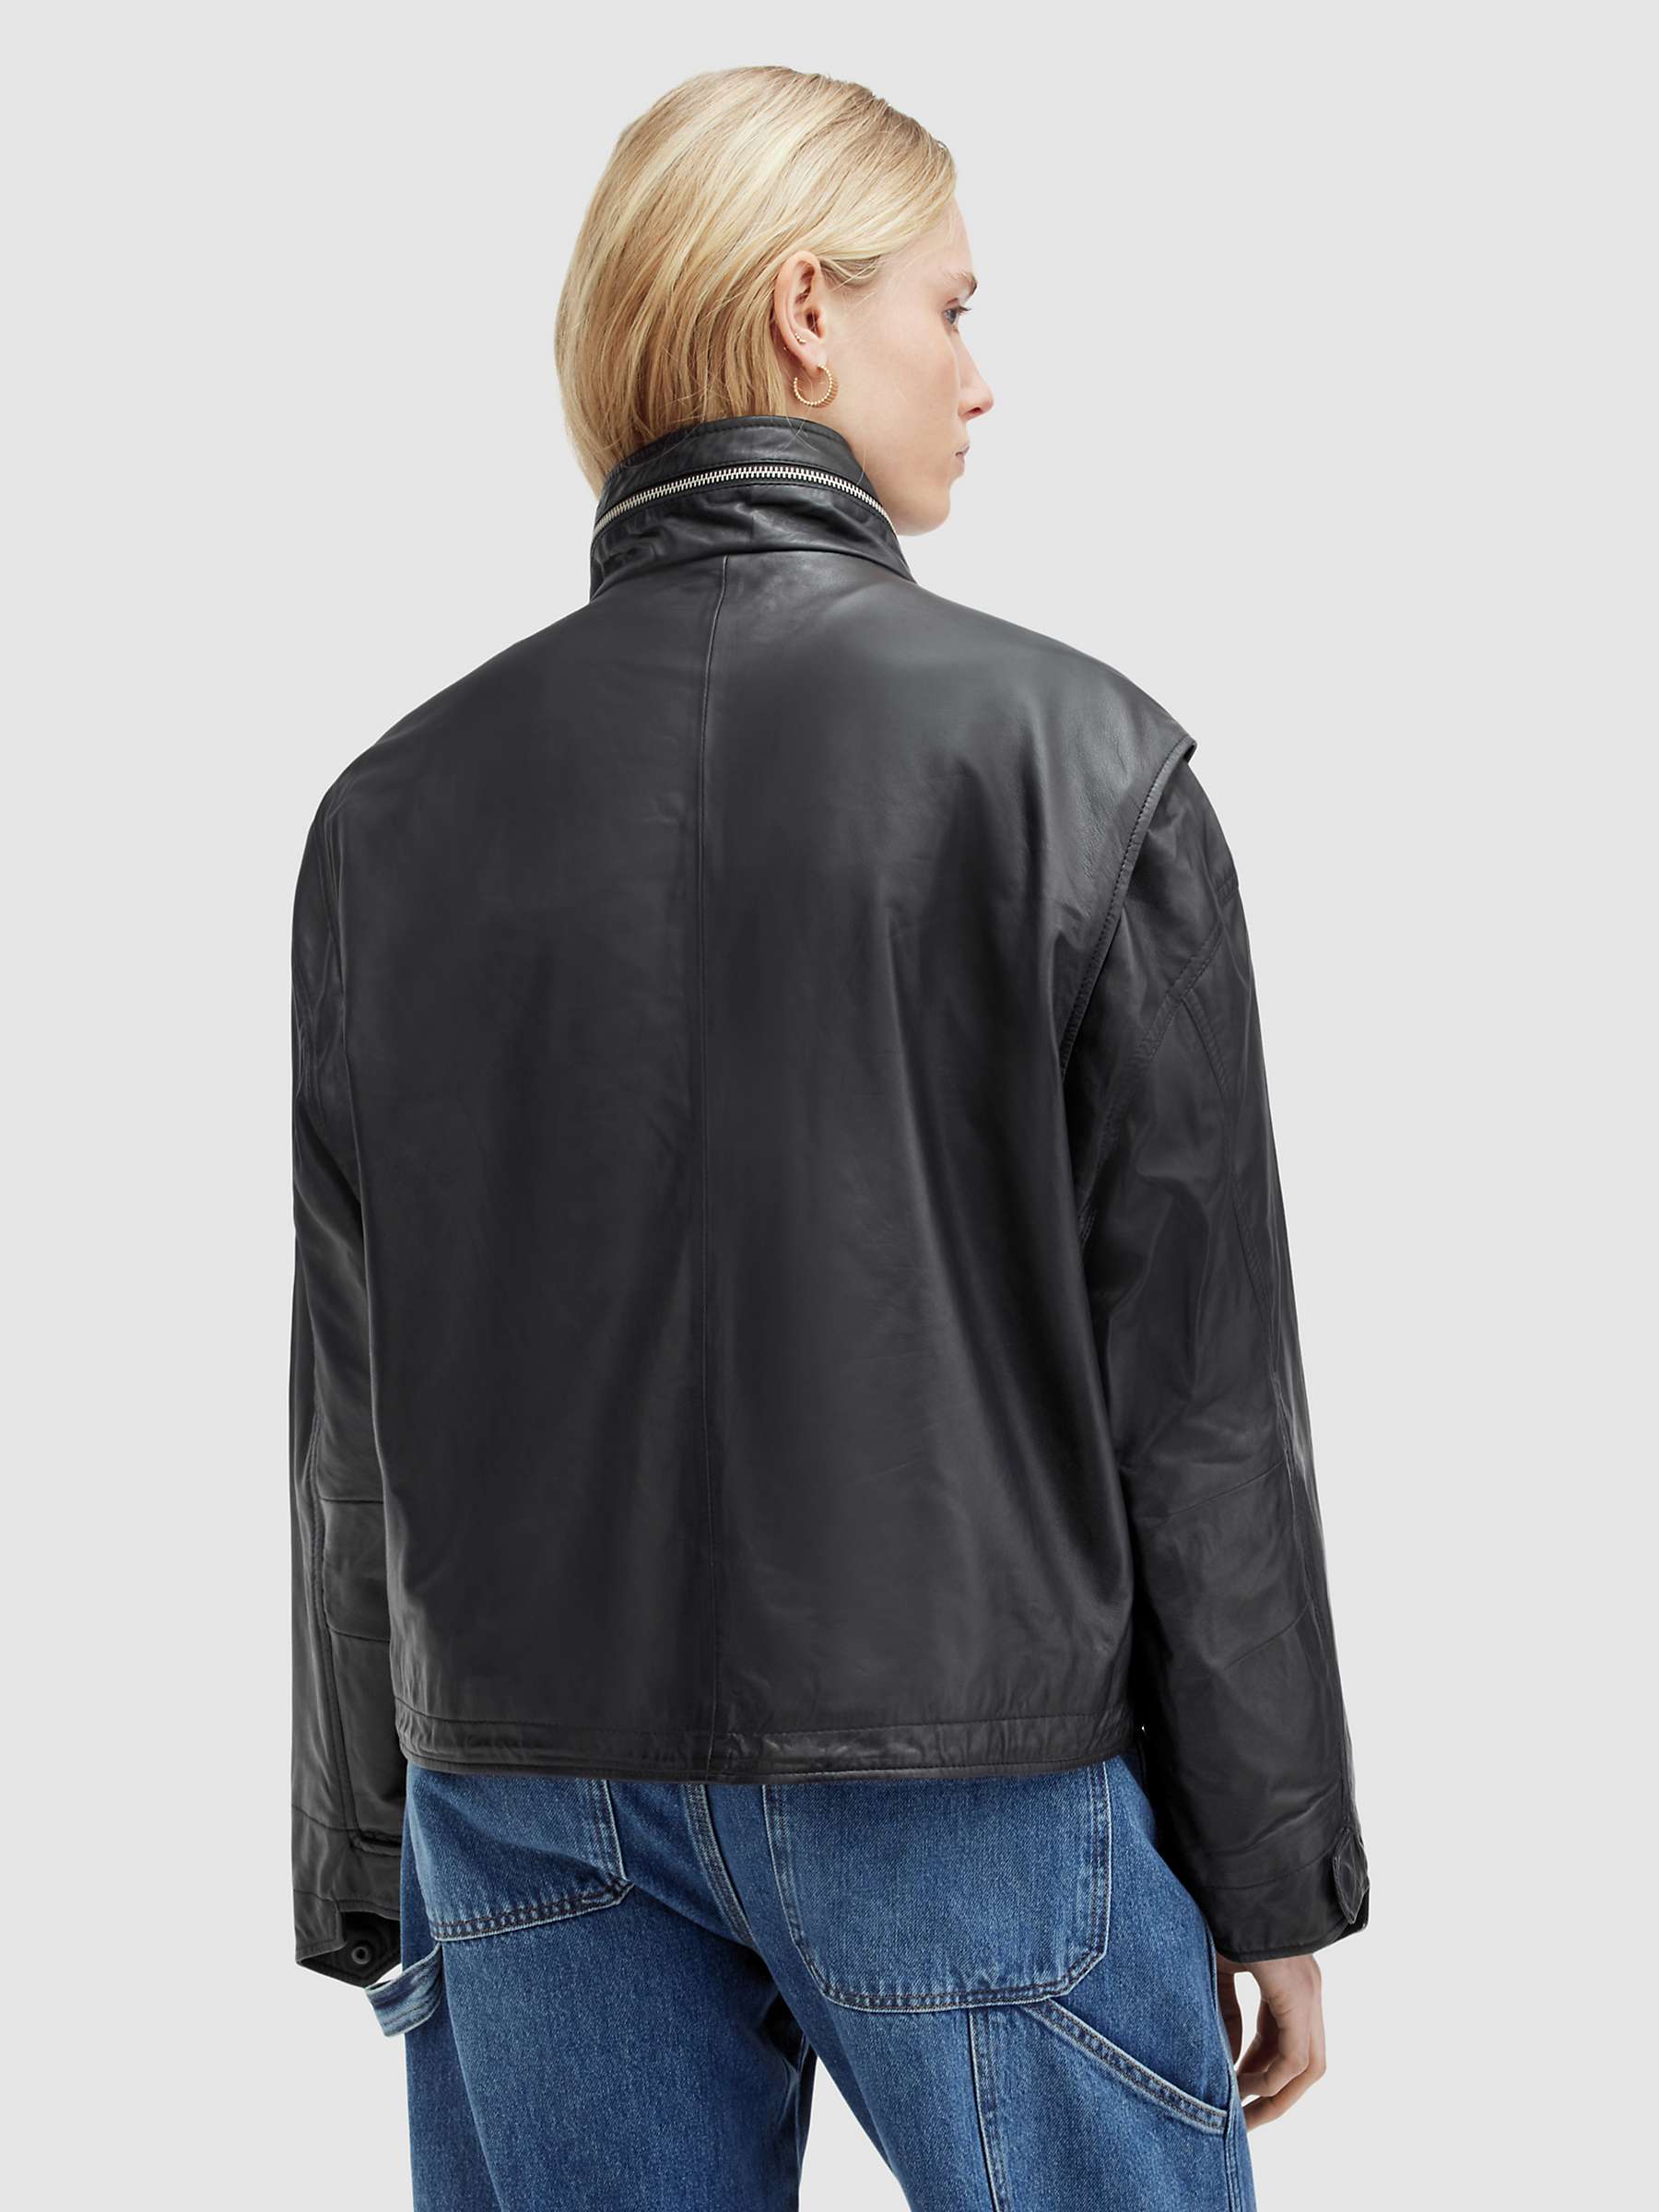 Buy AllSaints Clay Sheep Leather Jacket, Black Online at johnlewis.com